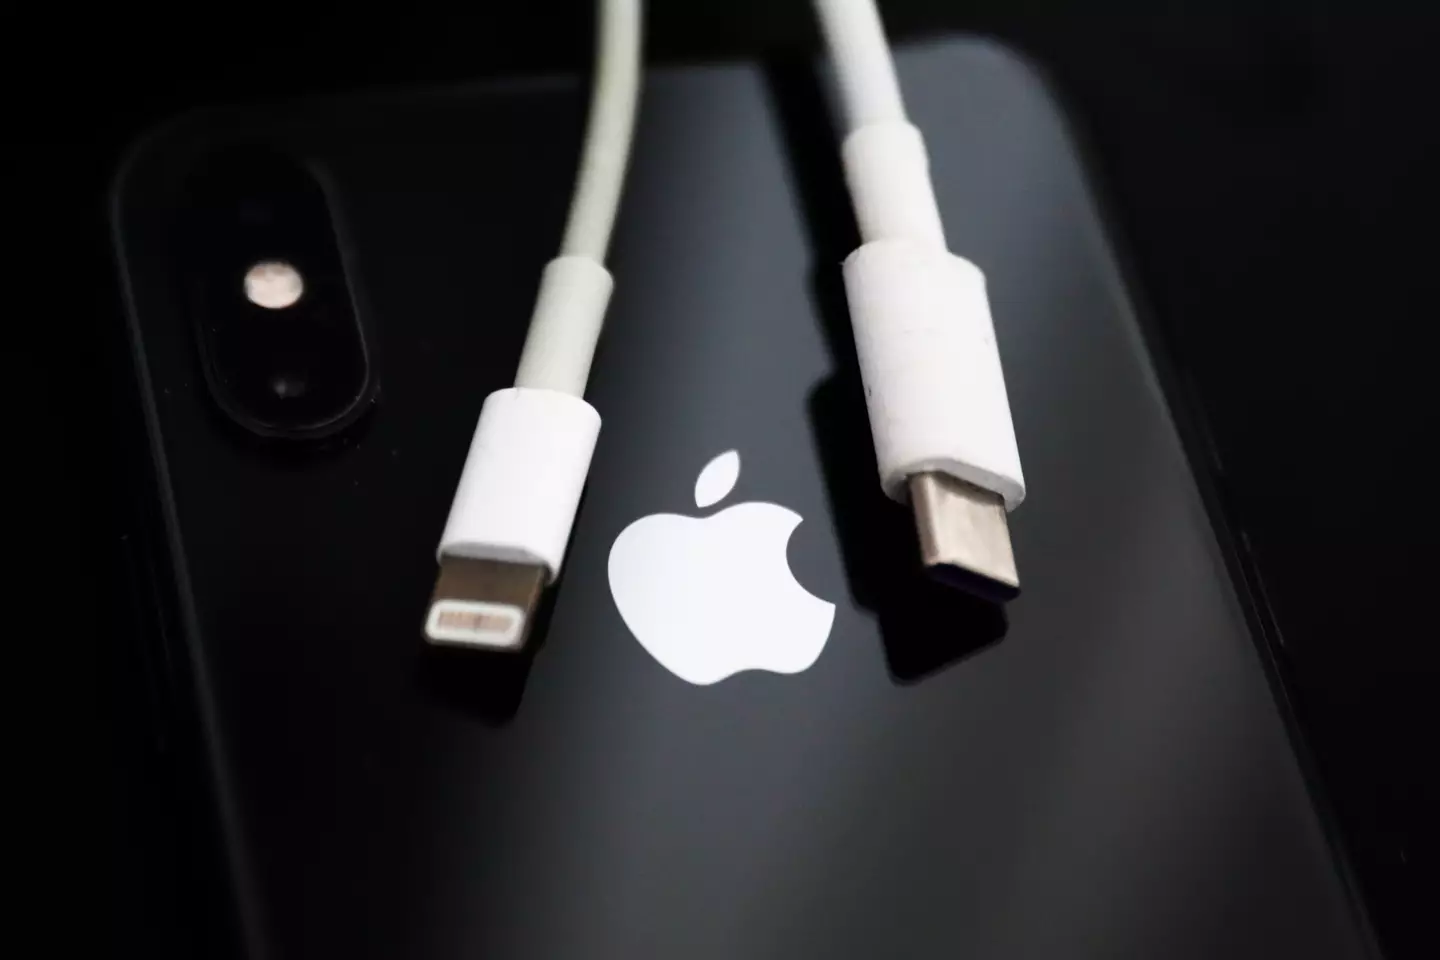 "Sleeping or sitting on the charging cable or connector should be avoided," Apple has said.